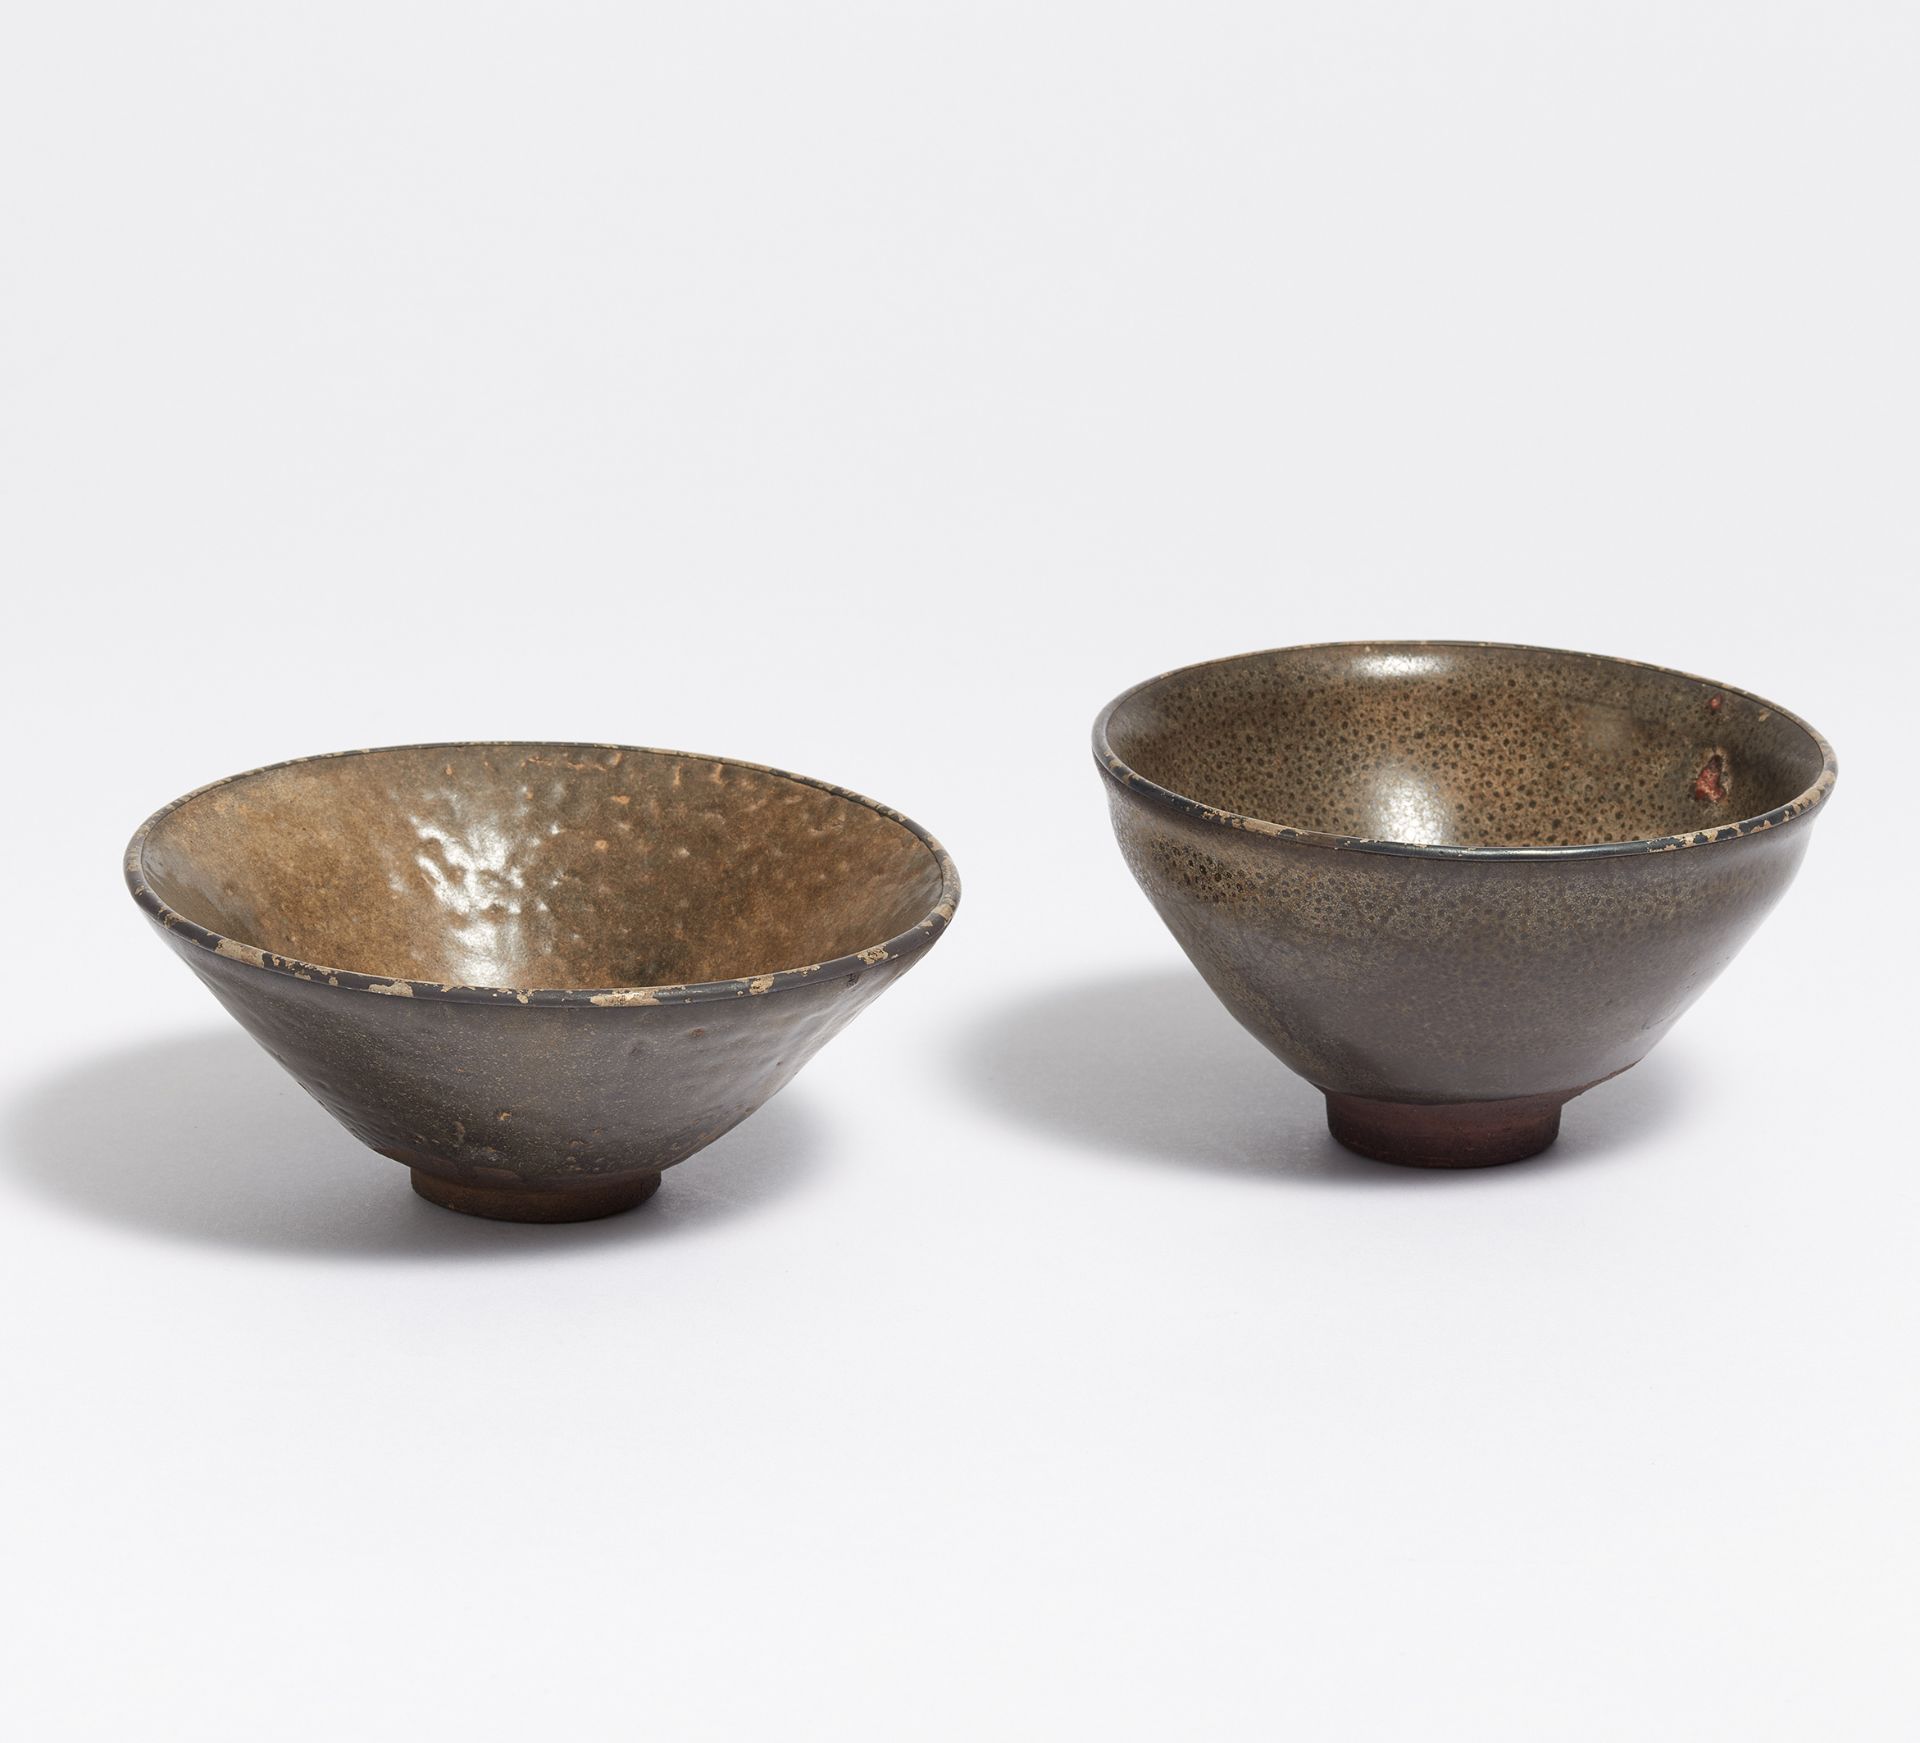 TWO TENMOKU TEA BOWLS. Japan. 18th-19th c. Dark brown, highly fired stoneware, covered with dark